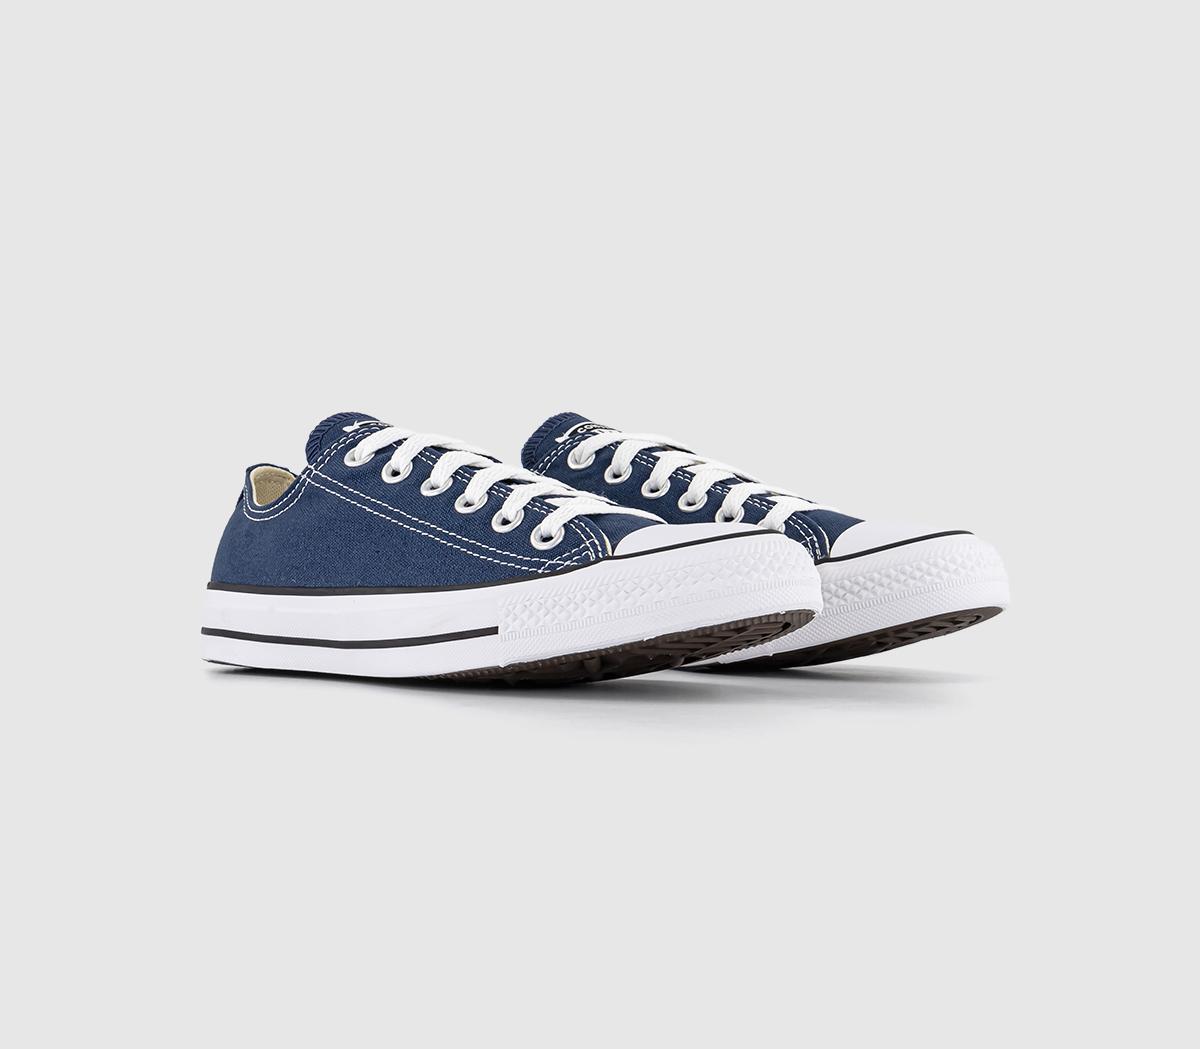 Mens Converse All Star Low Canvas Trainers In Navy Blue And White, 8